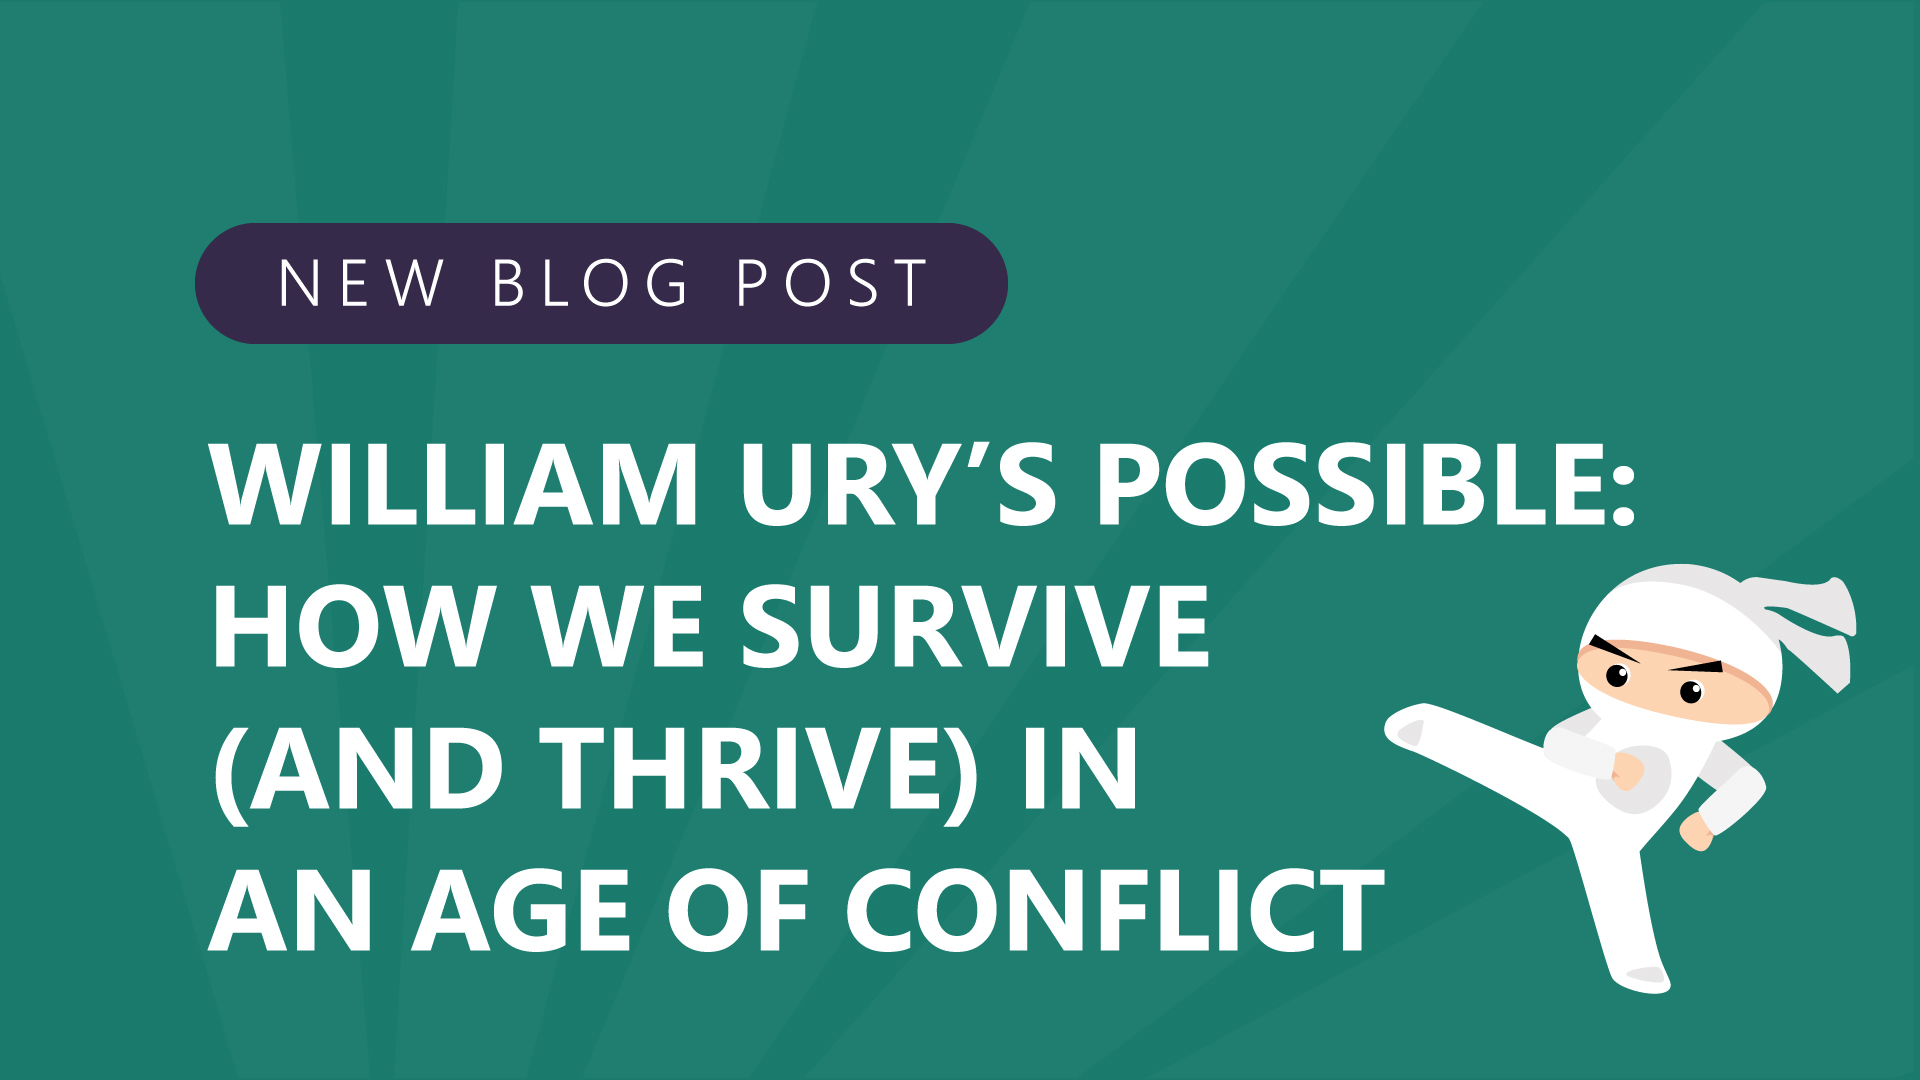 William urys possible how we survive and thrive in an age of conflict